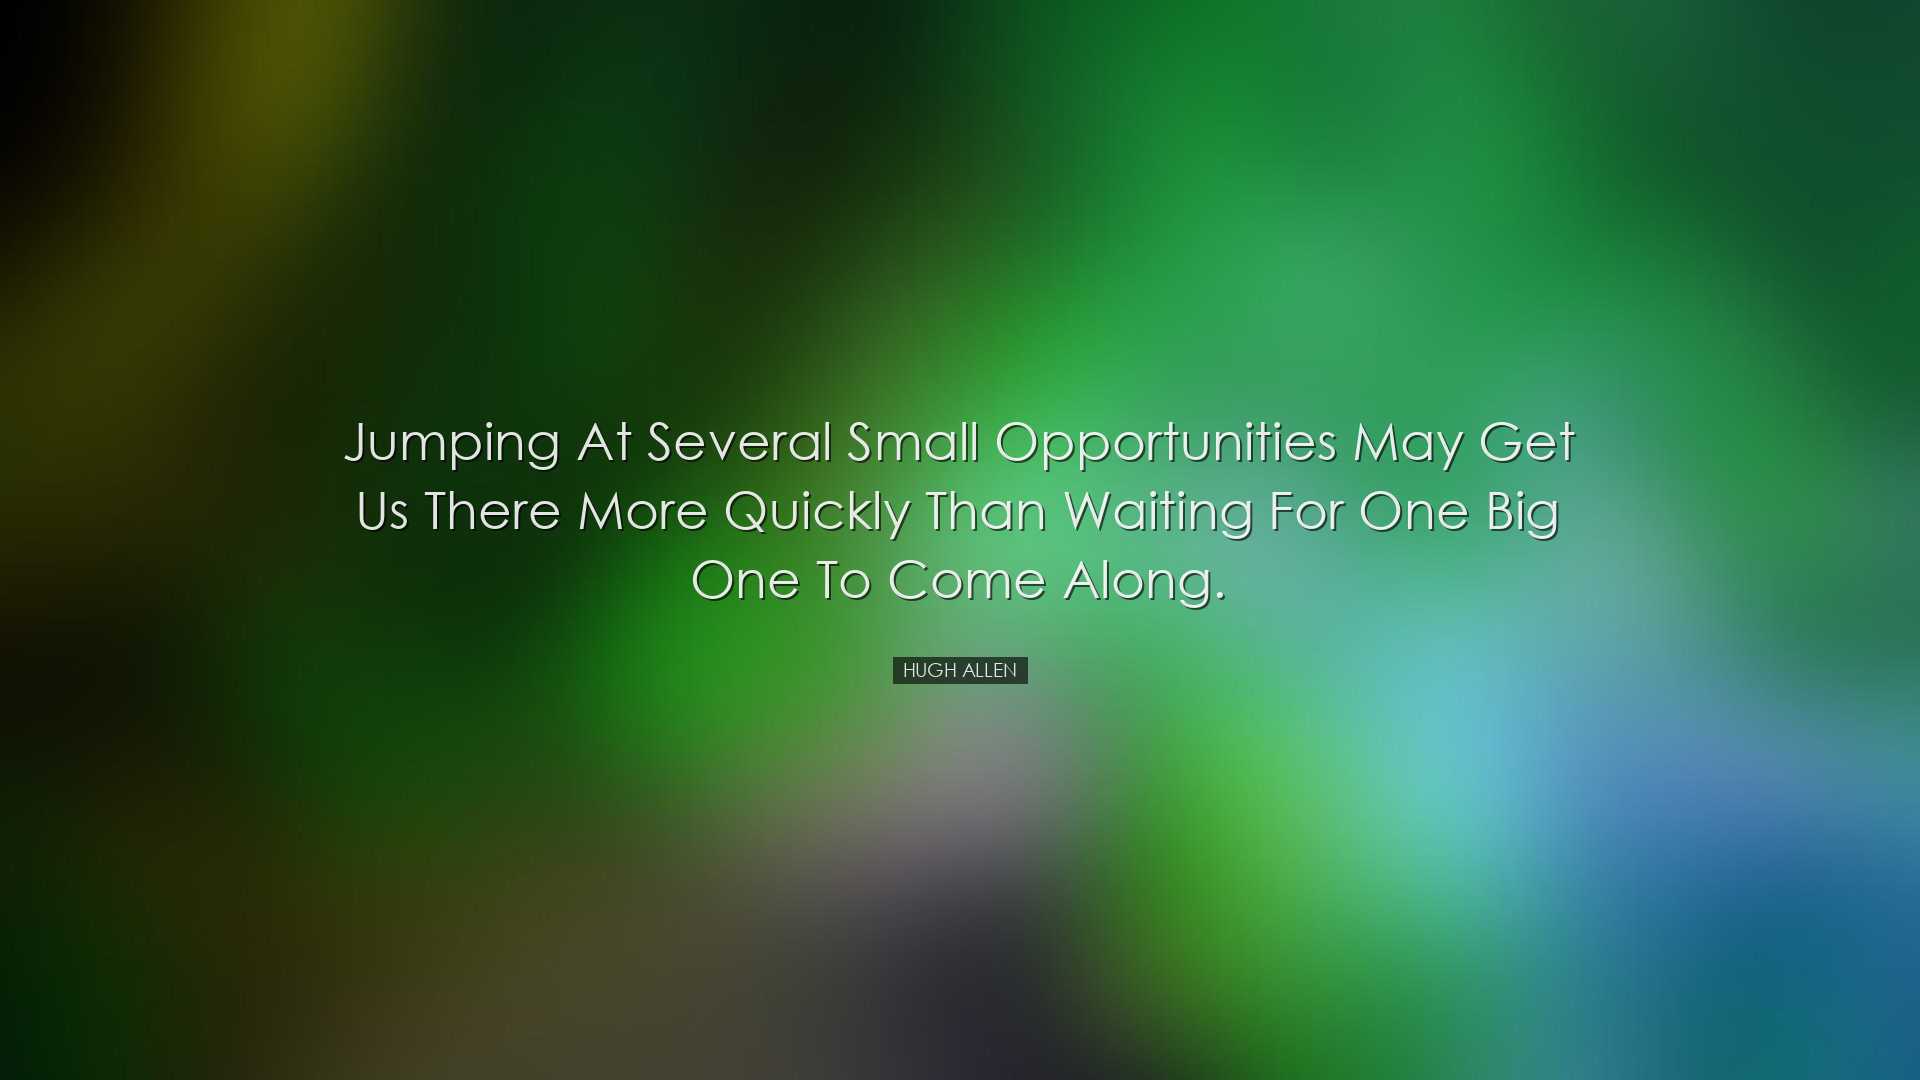 Jumping at several small opportunities may get us there more quick